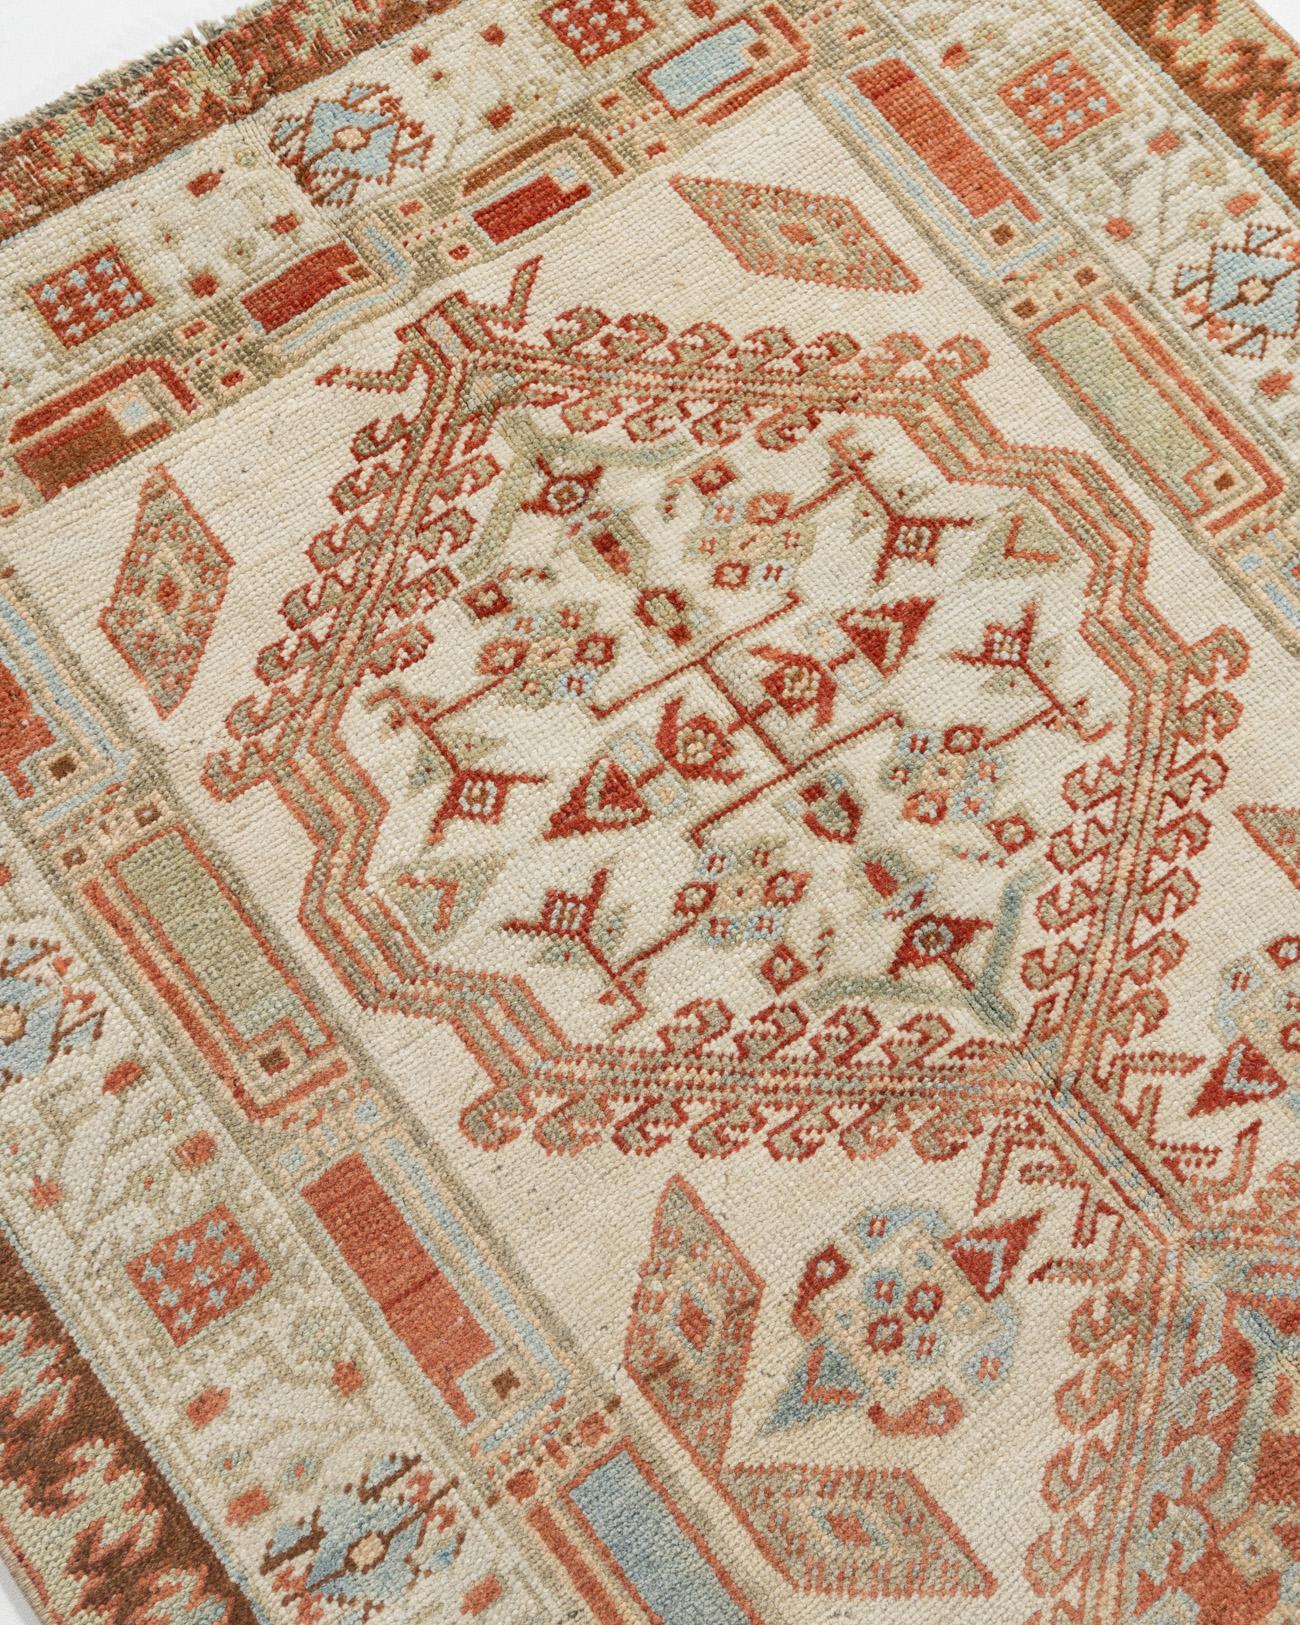 Vintage Persian Serab Runner 3'2 X 17'11. Serab is located on the edge of the Heriz weaving area and specializes in runners. Camel borders are standard on antique Serab rugs. The patterns are geometric, the wool pile is quite dense and more modern